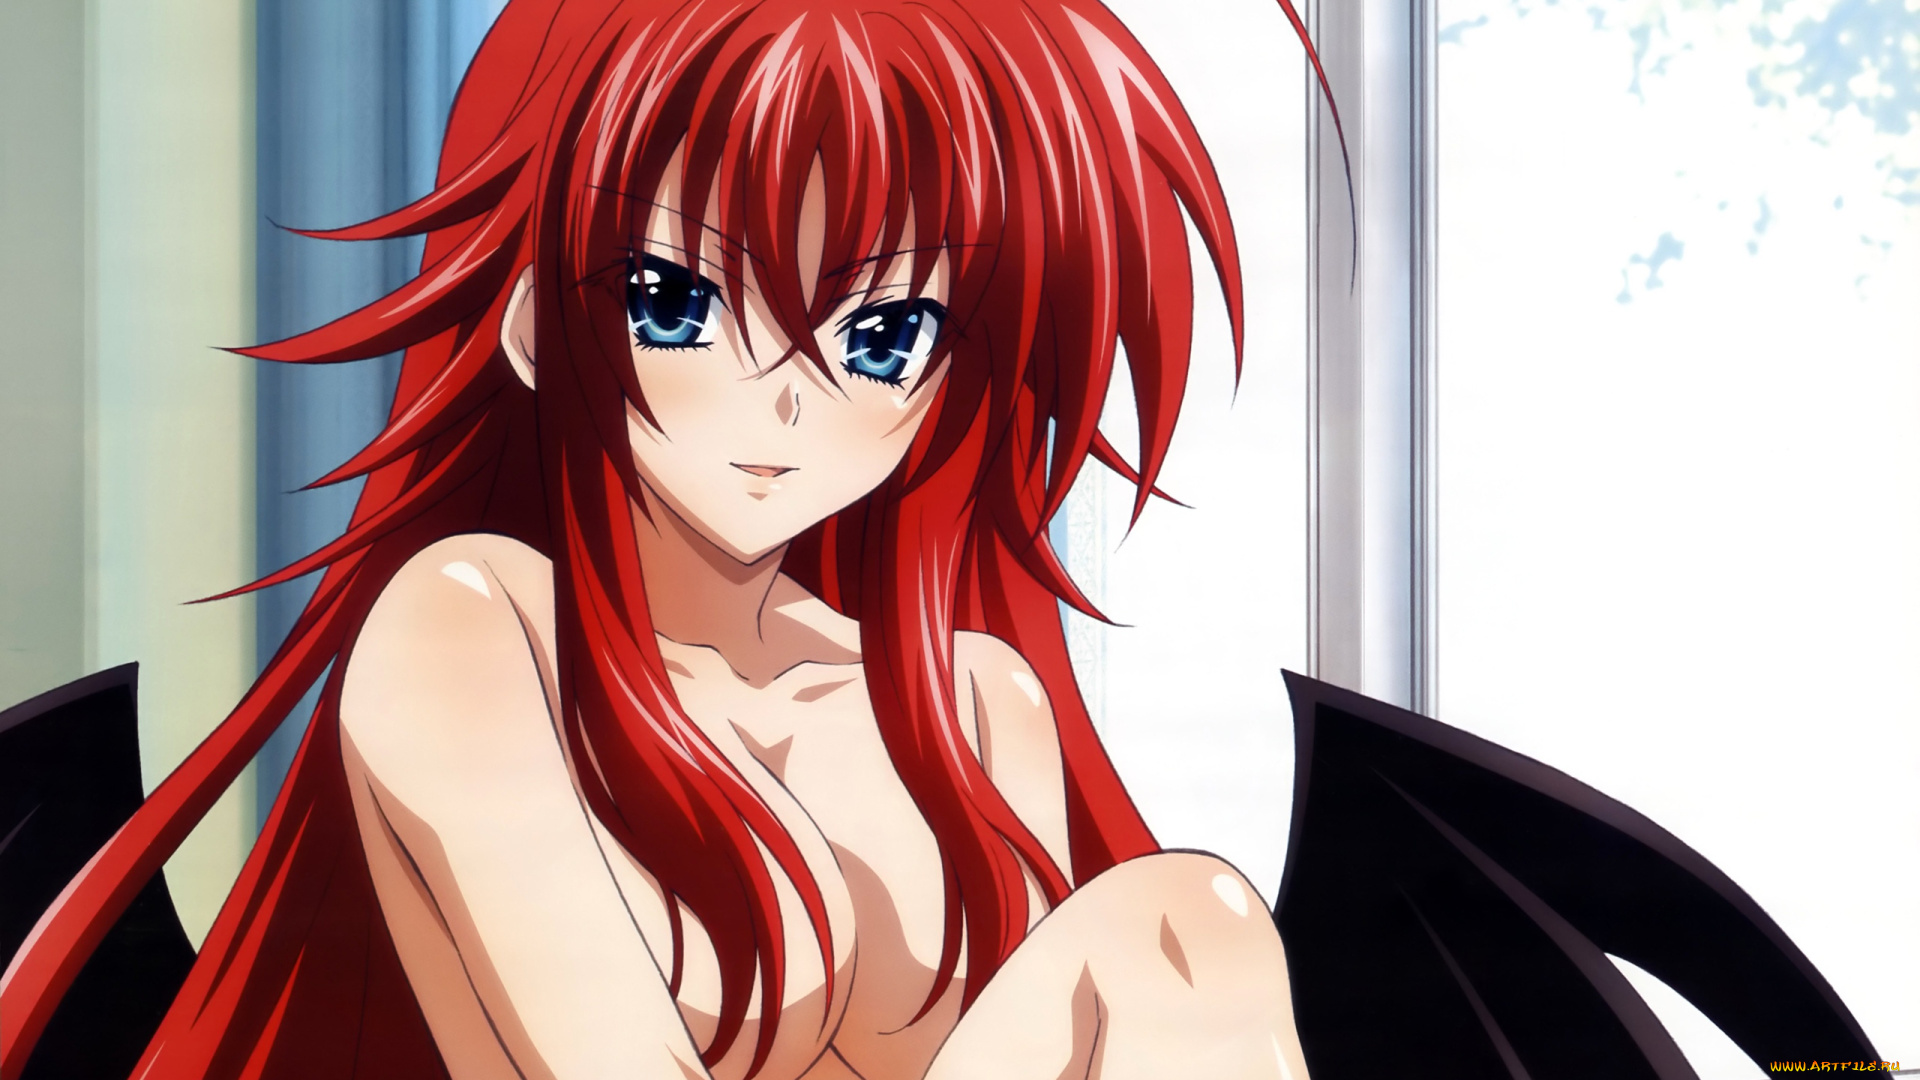 Highschool dxd fanfiction oc from our world.